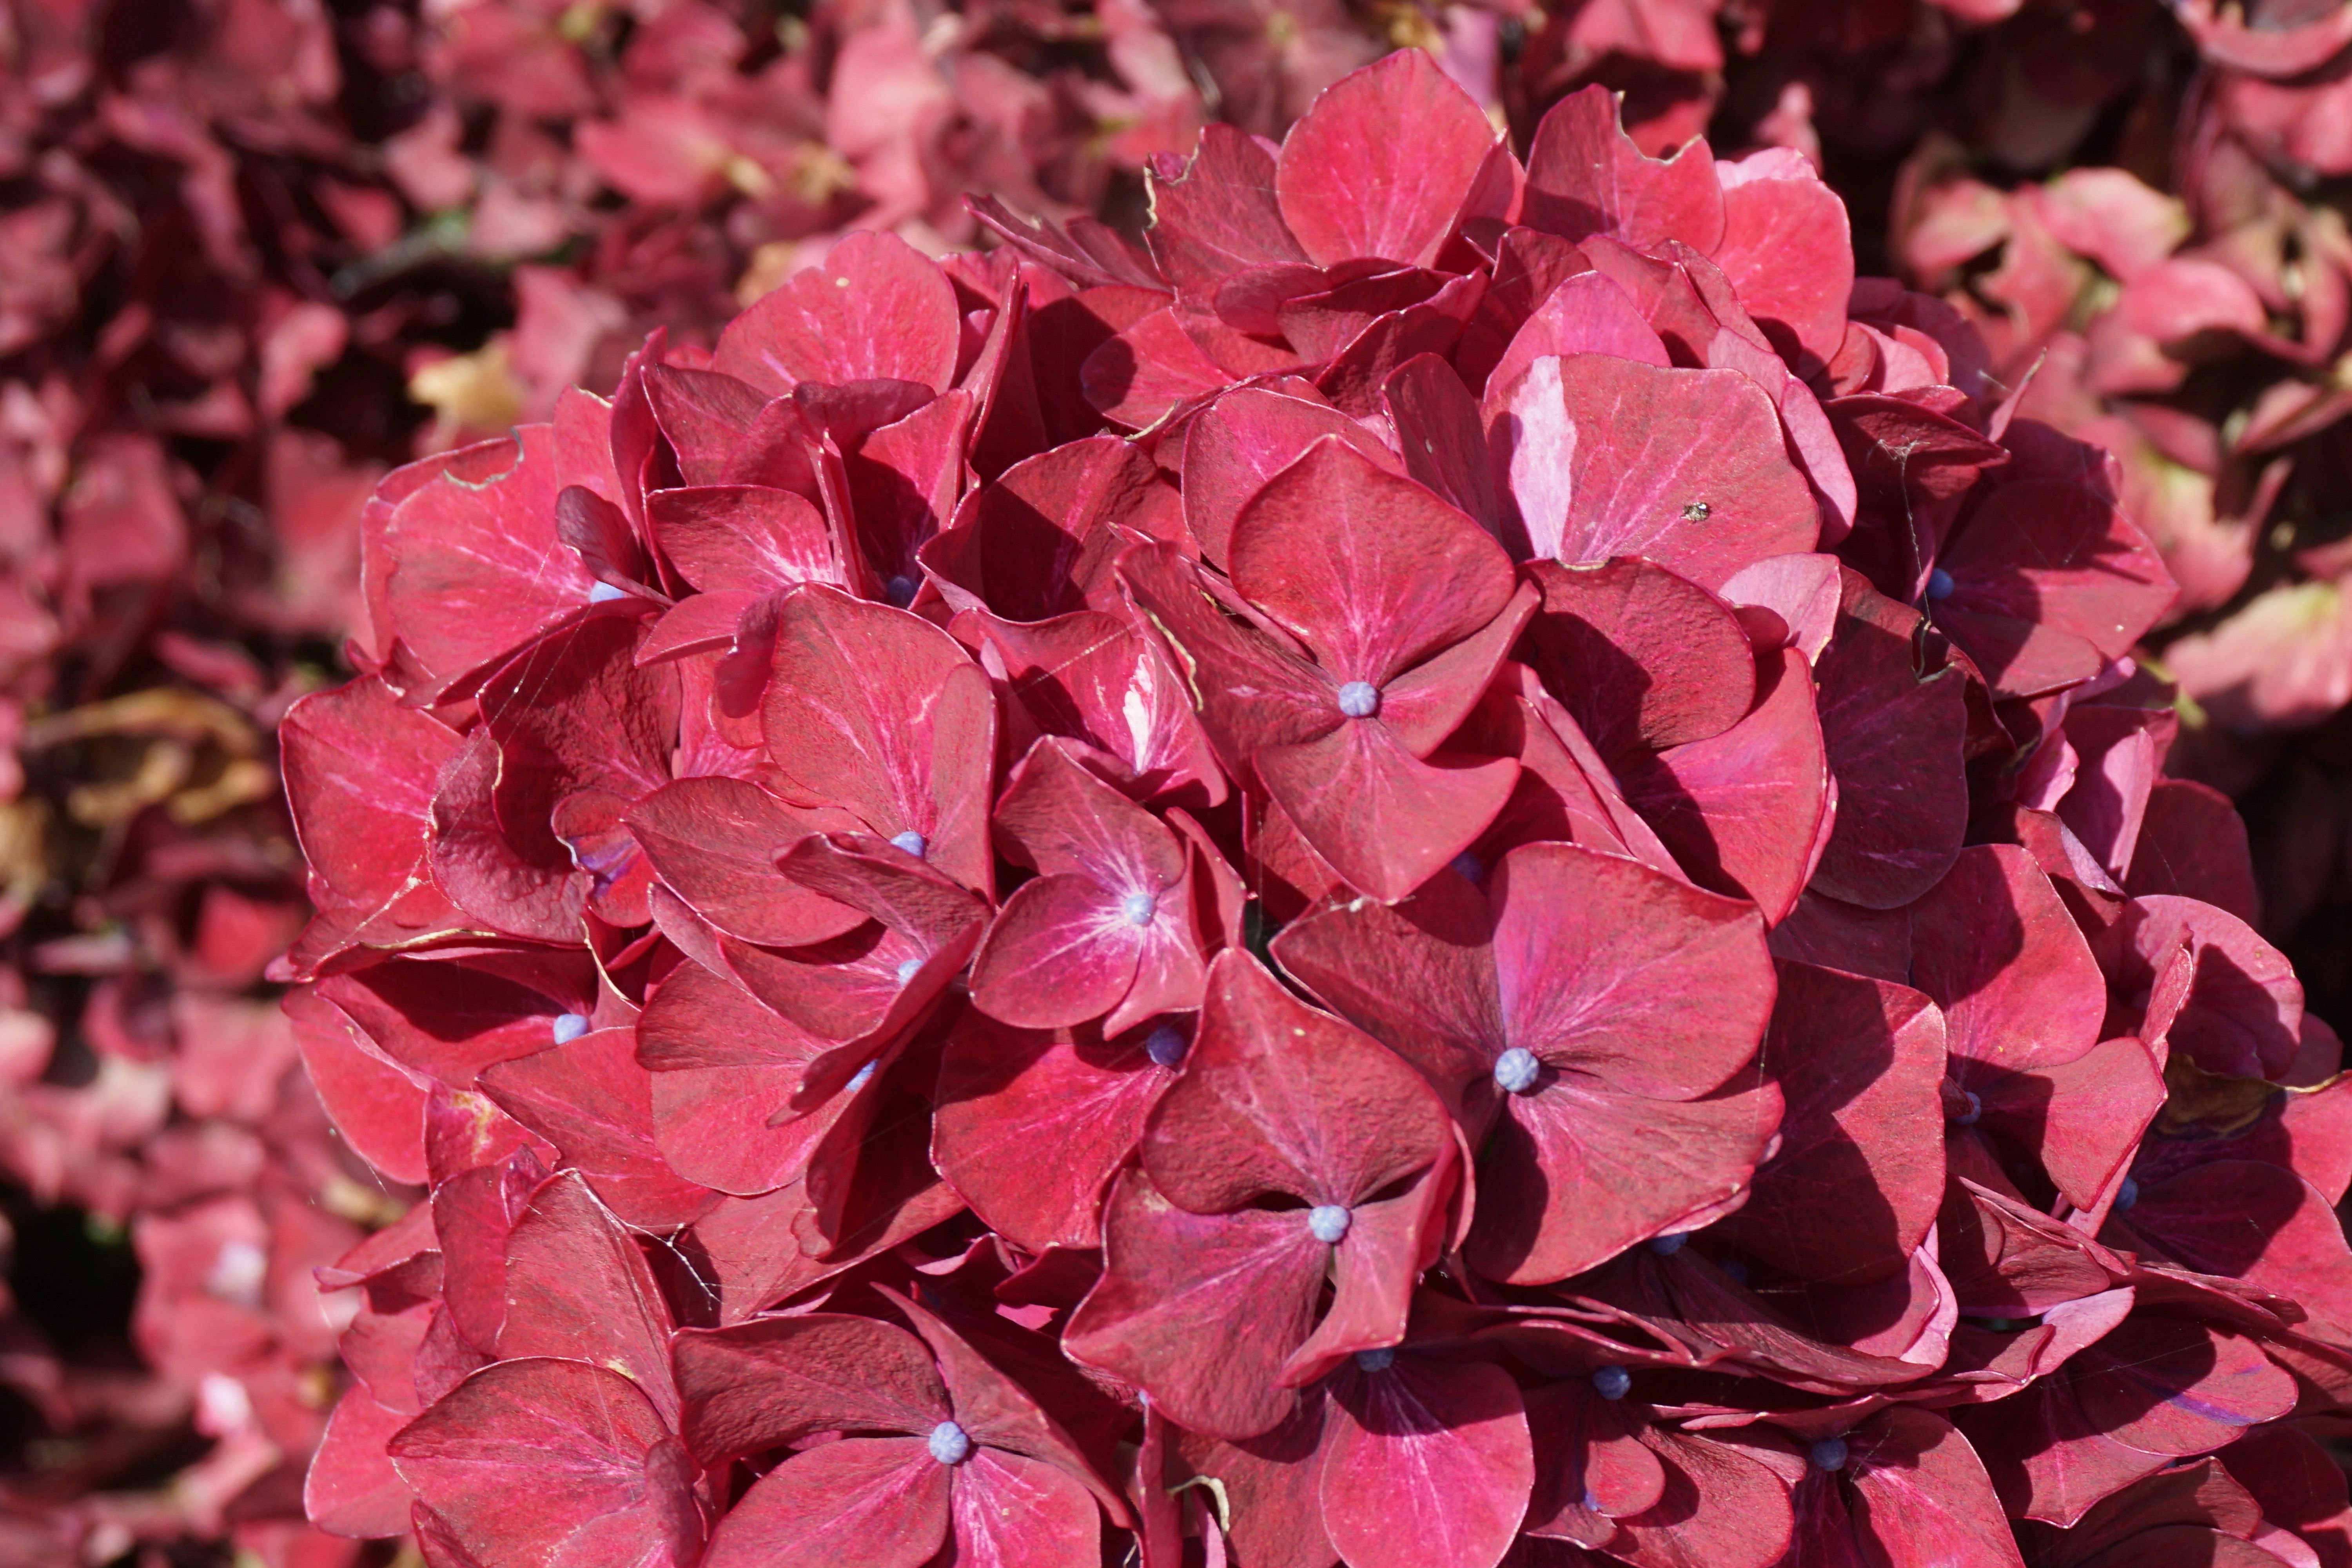 images/plants/hydrangea/hyd-magical-everlasting-crimson/hyd-magical-everlasting-crimson-0007.jpg